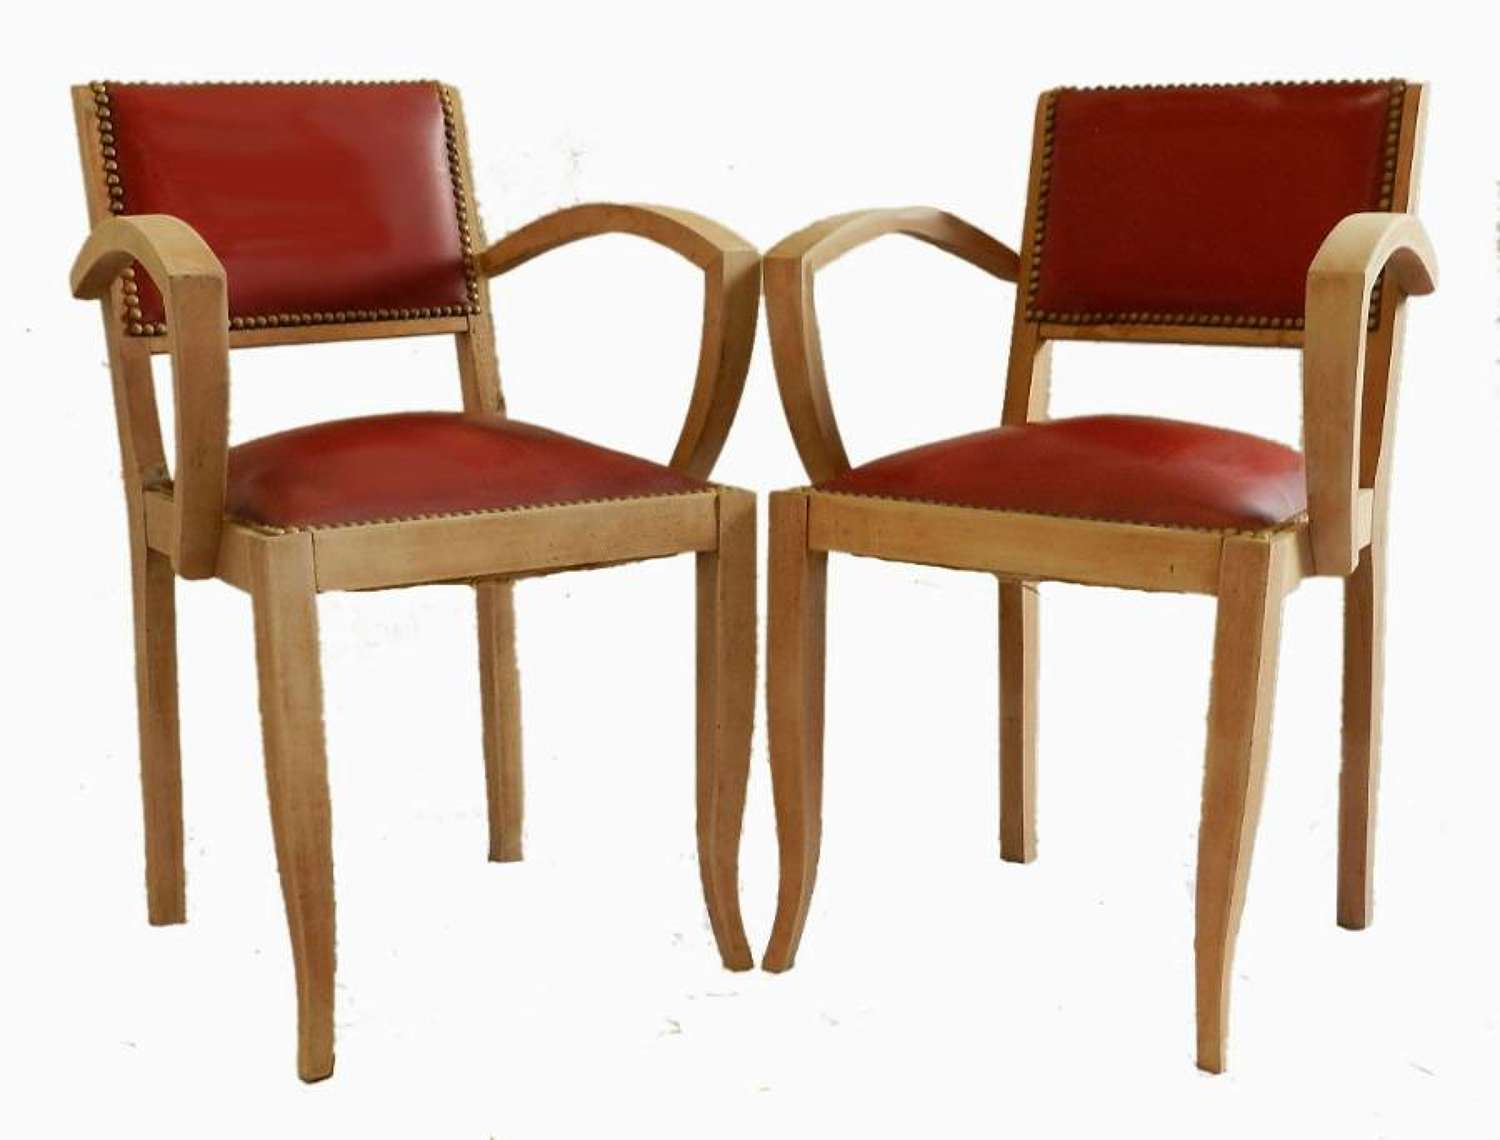 5 French Art Deco Bridge Chairs (will separate)